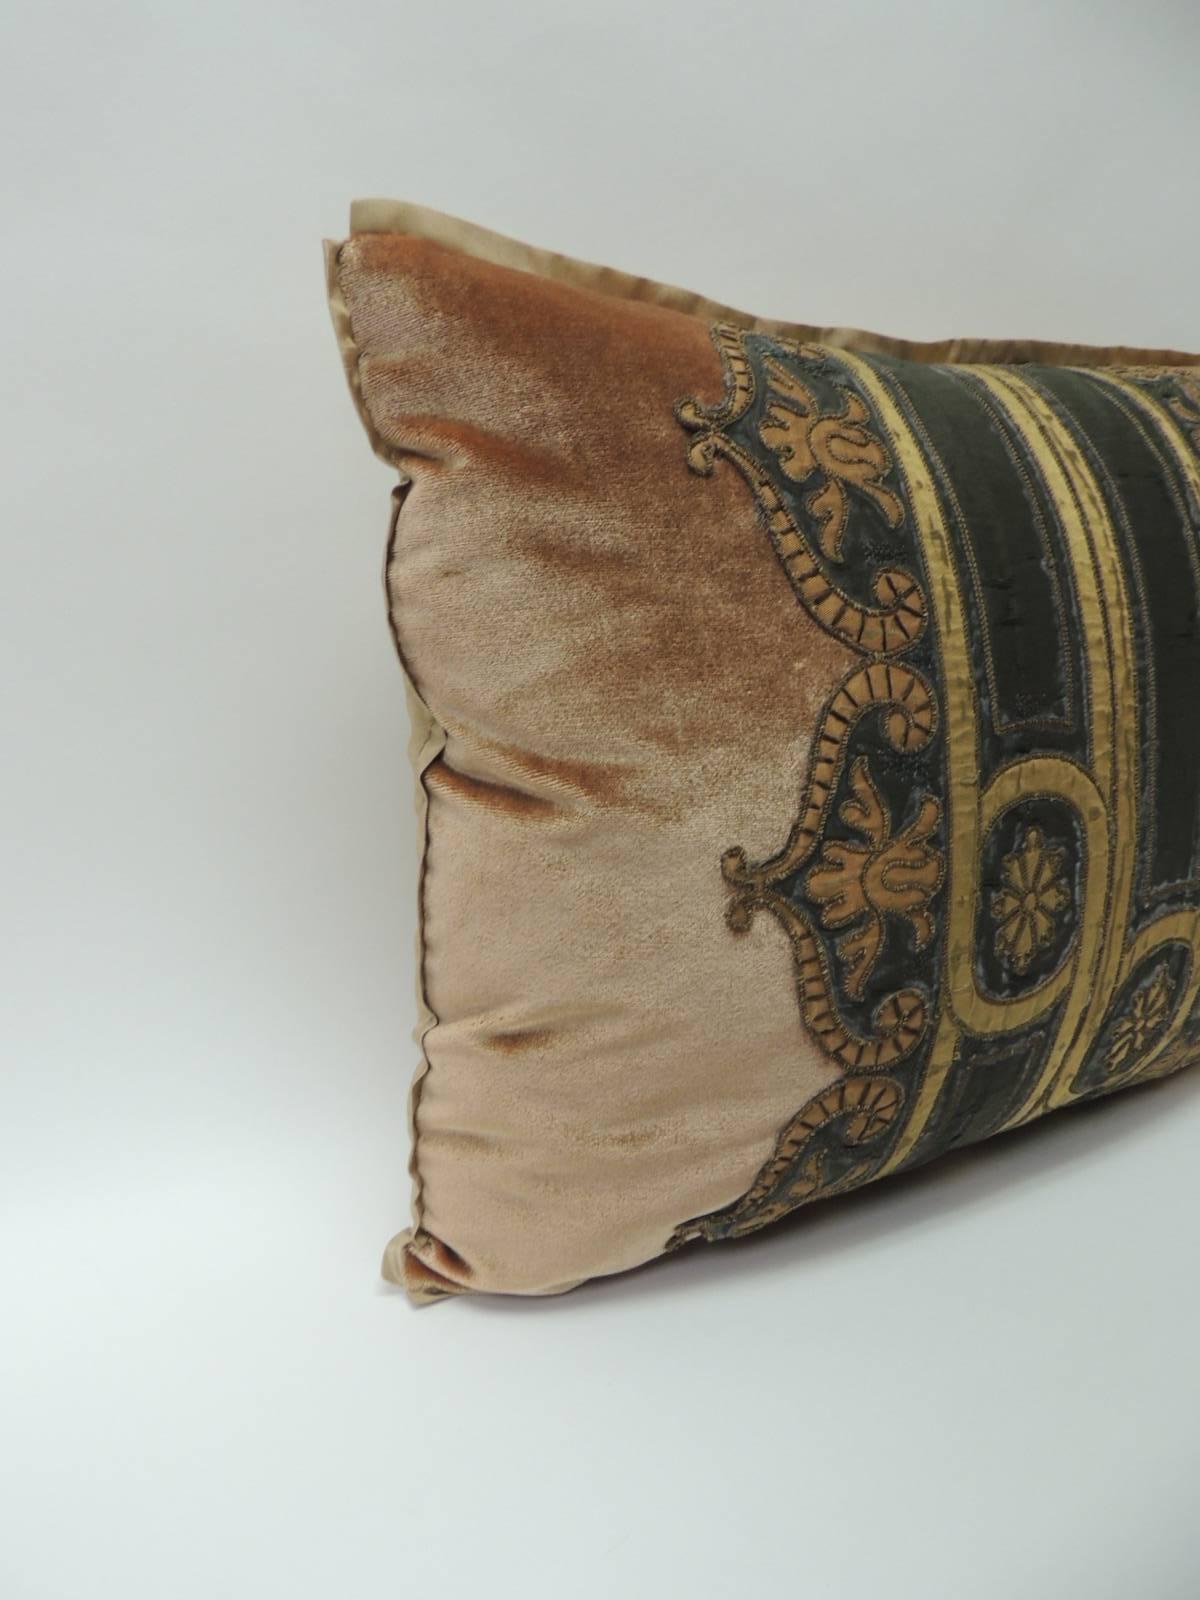 19th century silk golden velvet with French silk woven velvet ribbon decorative pillow
Bolster throw pillow handcrafted with golden silk velvet framed with a French green and gold woven embroidered deco inspired trim. Art Deco style trim exhibits a